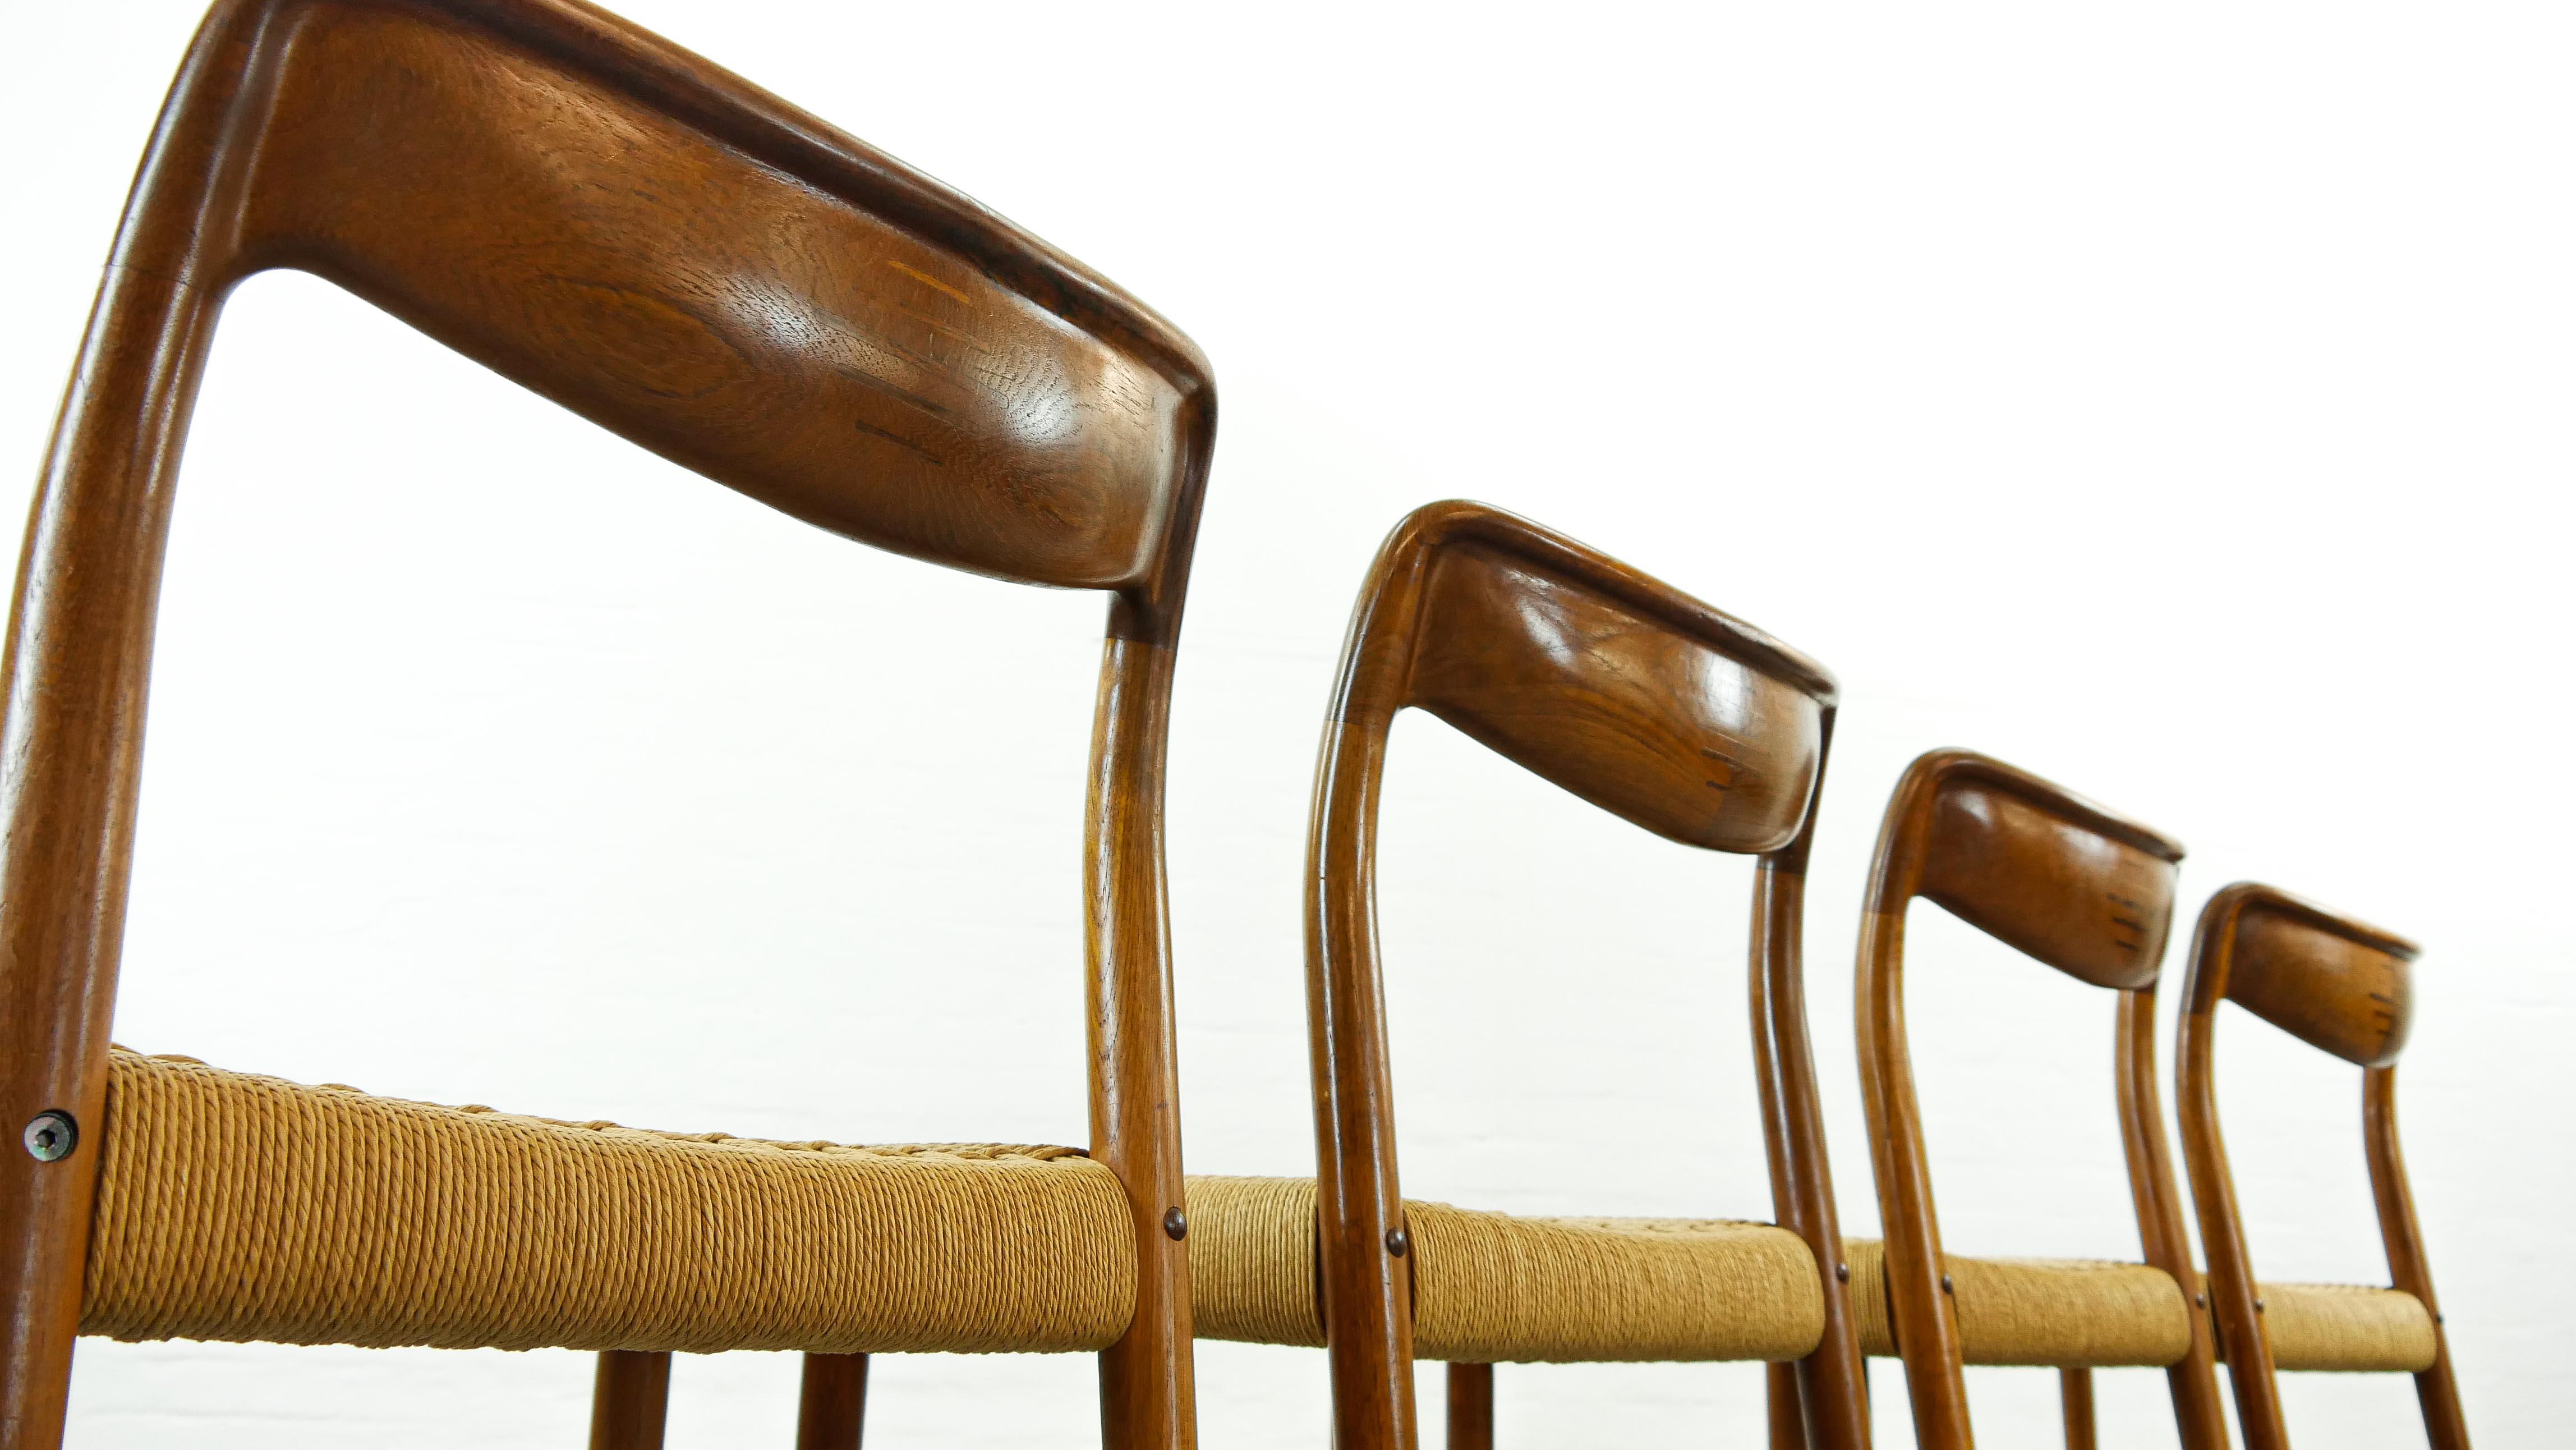 Set of 4 Teak Chairs with Papercord Seat by Johannes Andersen for Uldum, Denmark 4